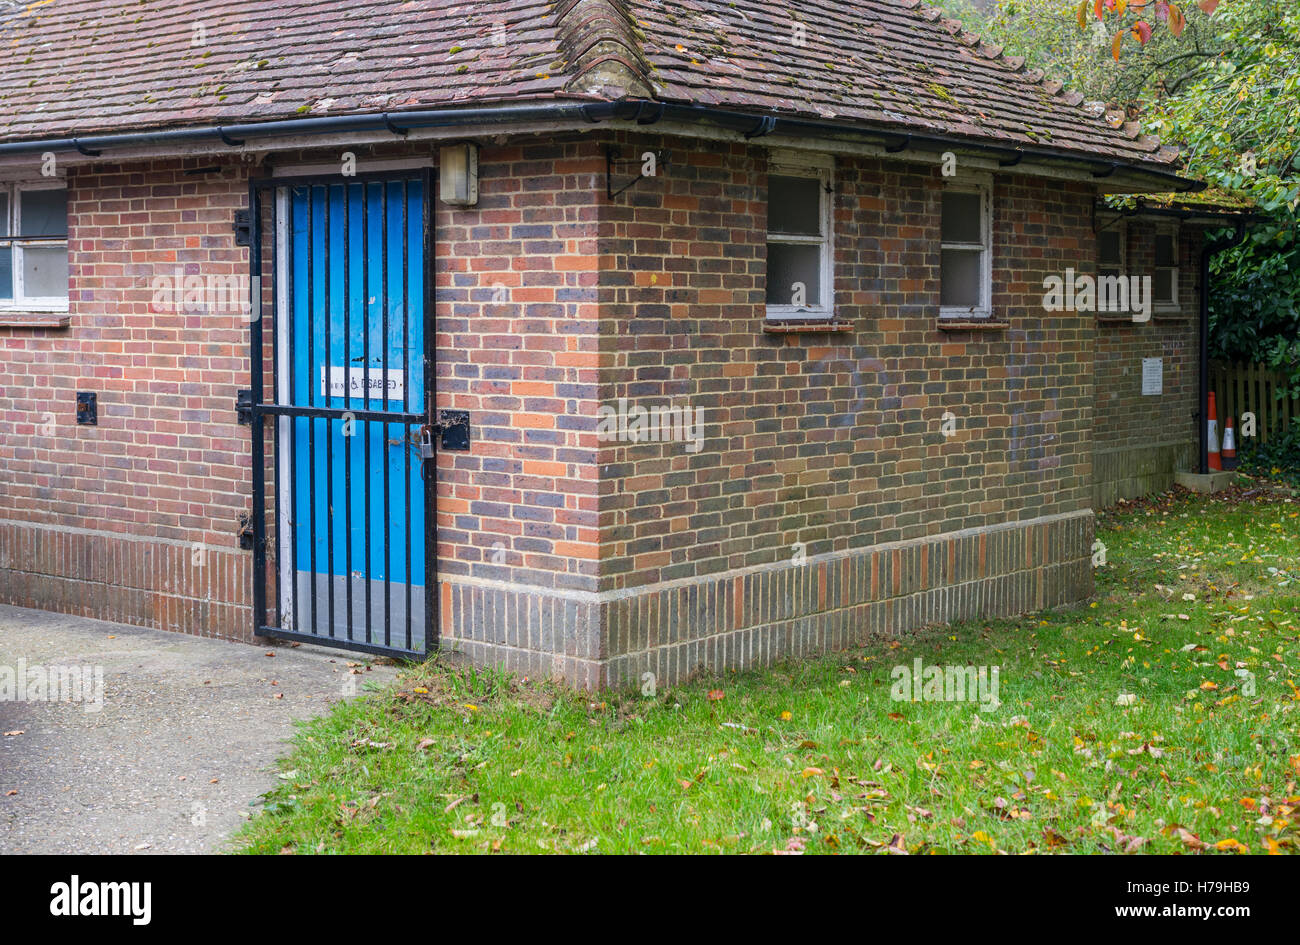 Closed public toilets in the UK. Stock Photo